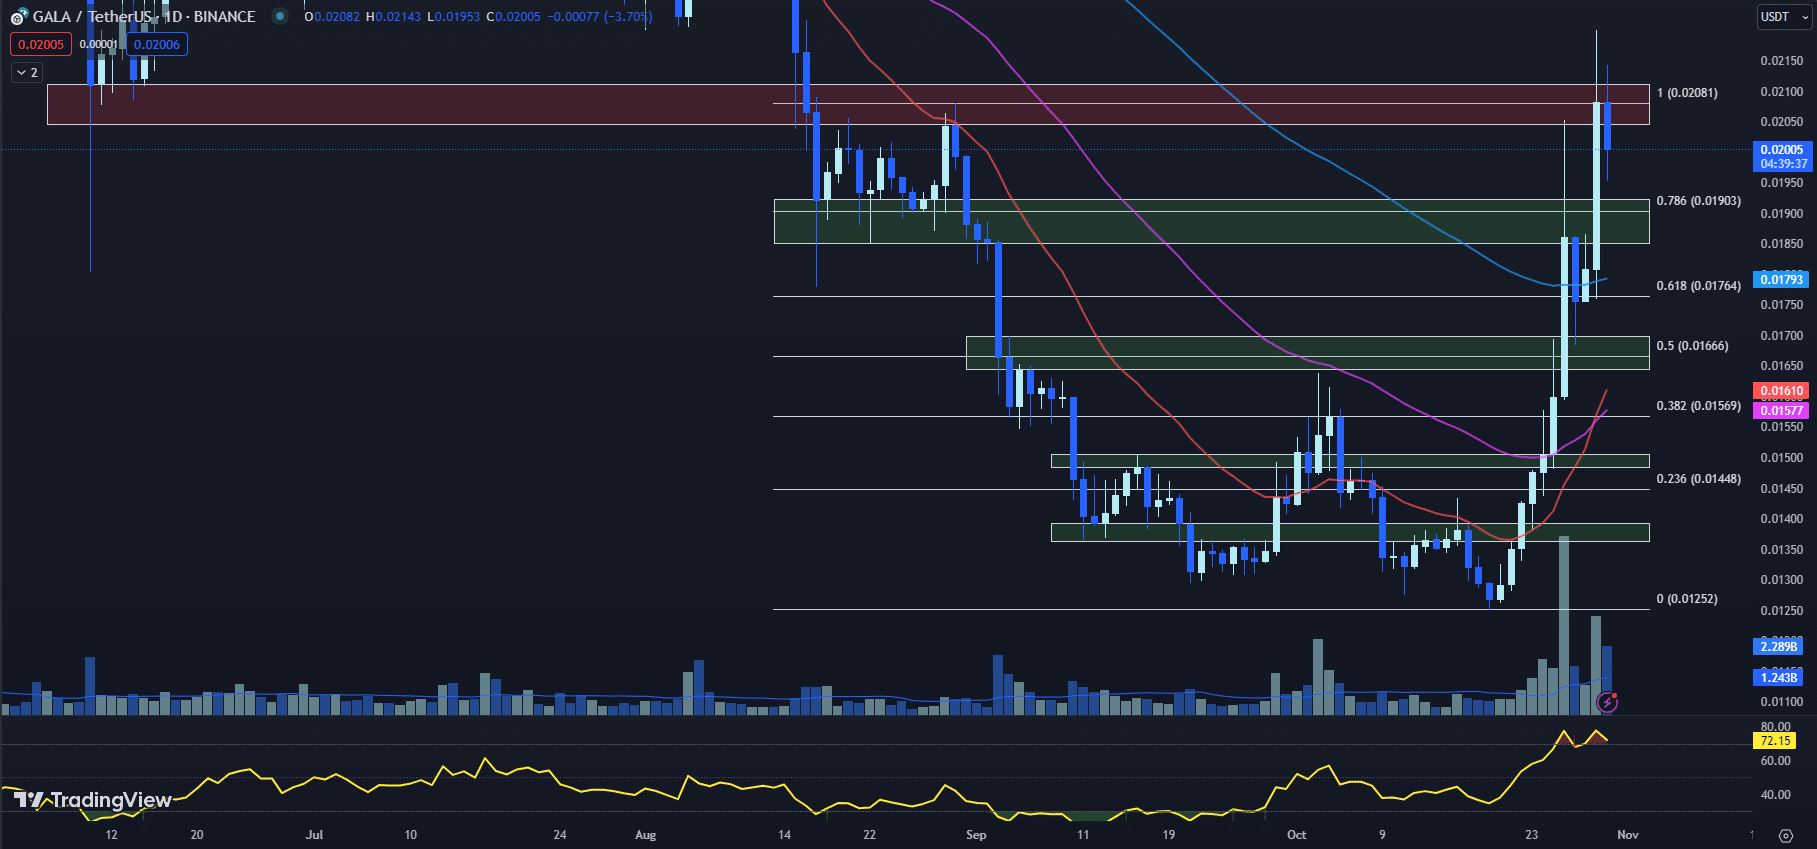 tradingview chart for the gala price 10-30-23